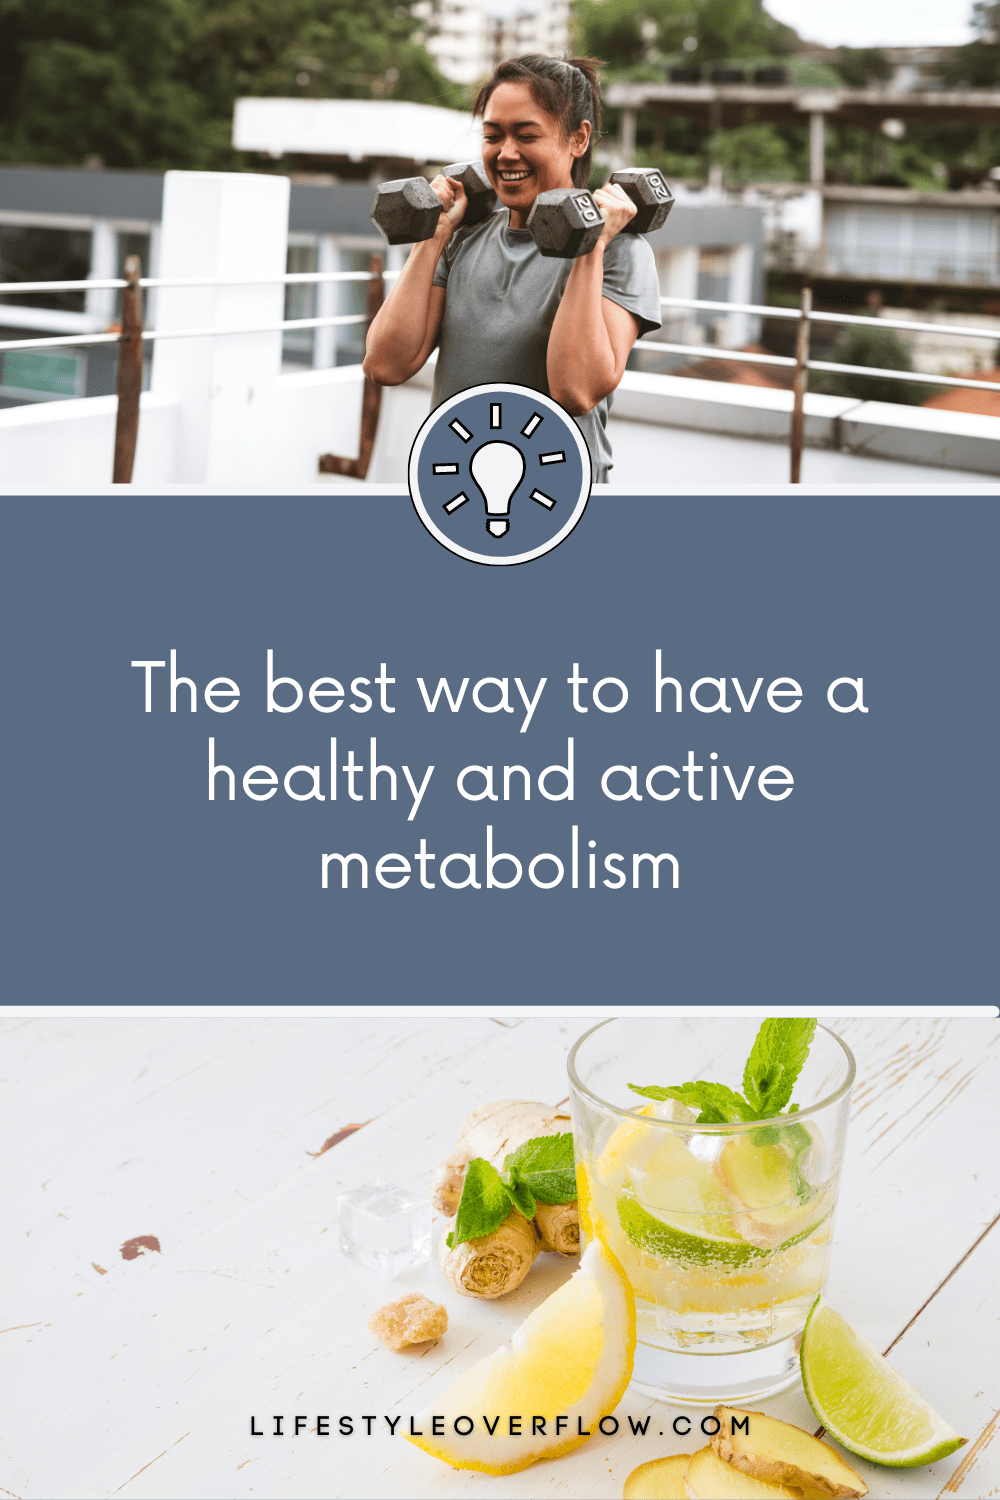 a graphic with 2 photos. A woman lifting weights outside and a photo of a juice glass with limes, lemons and ginger. Blue text box that reads: the best way to have a healthy and active metabolism